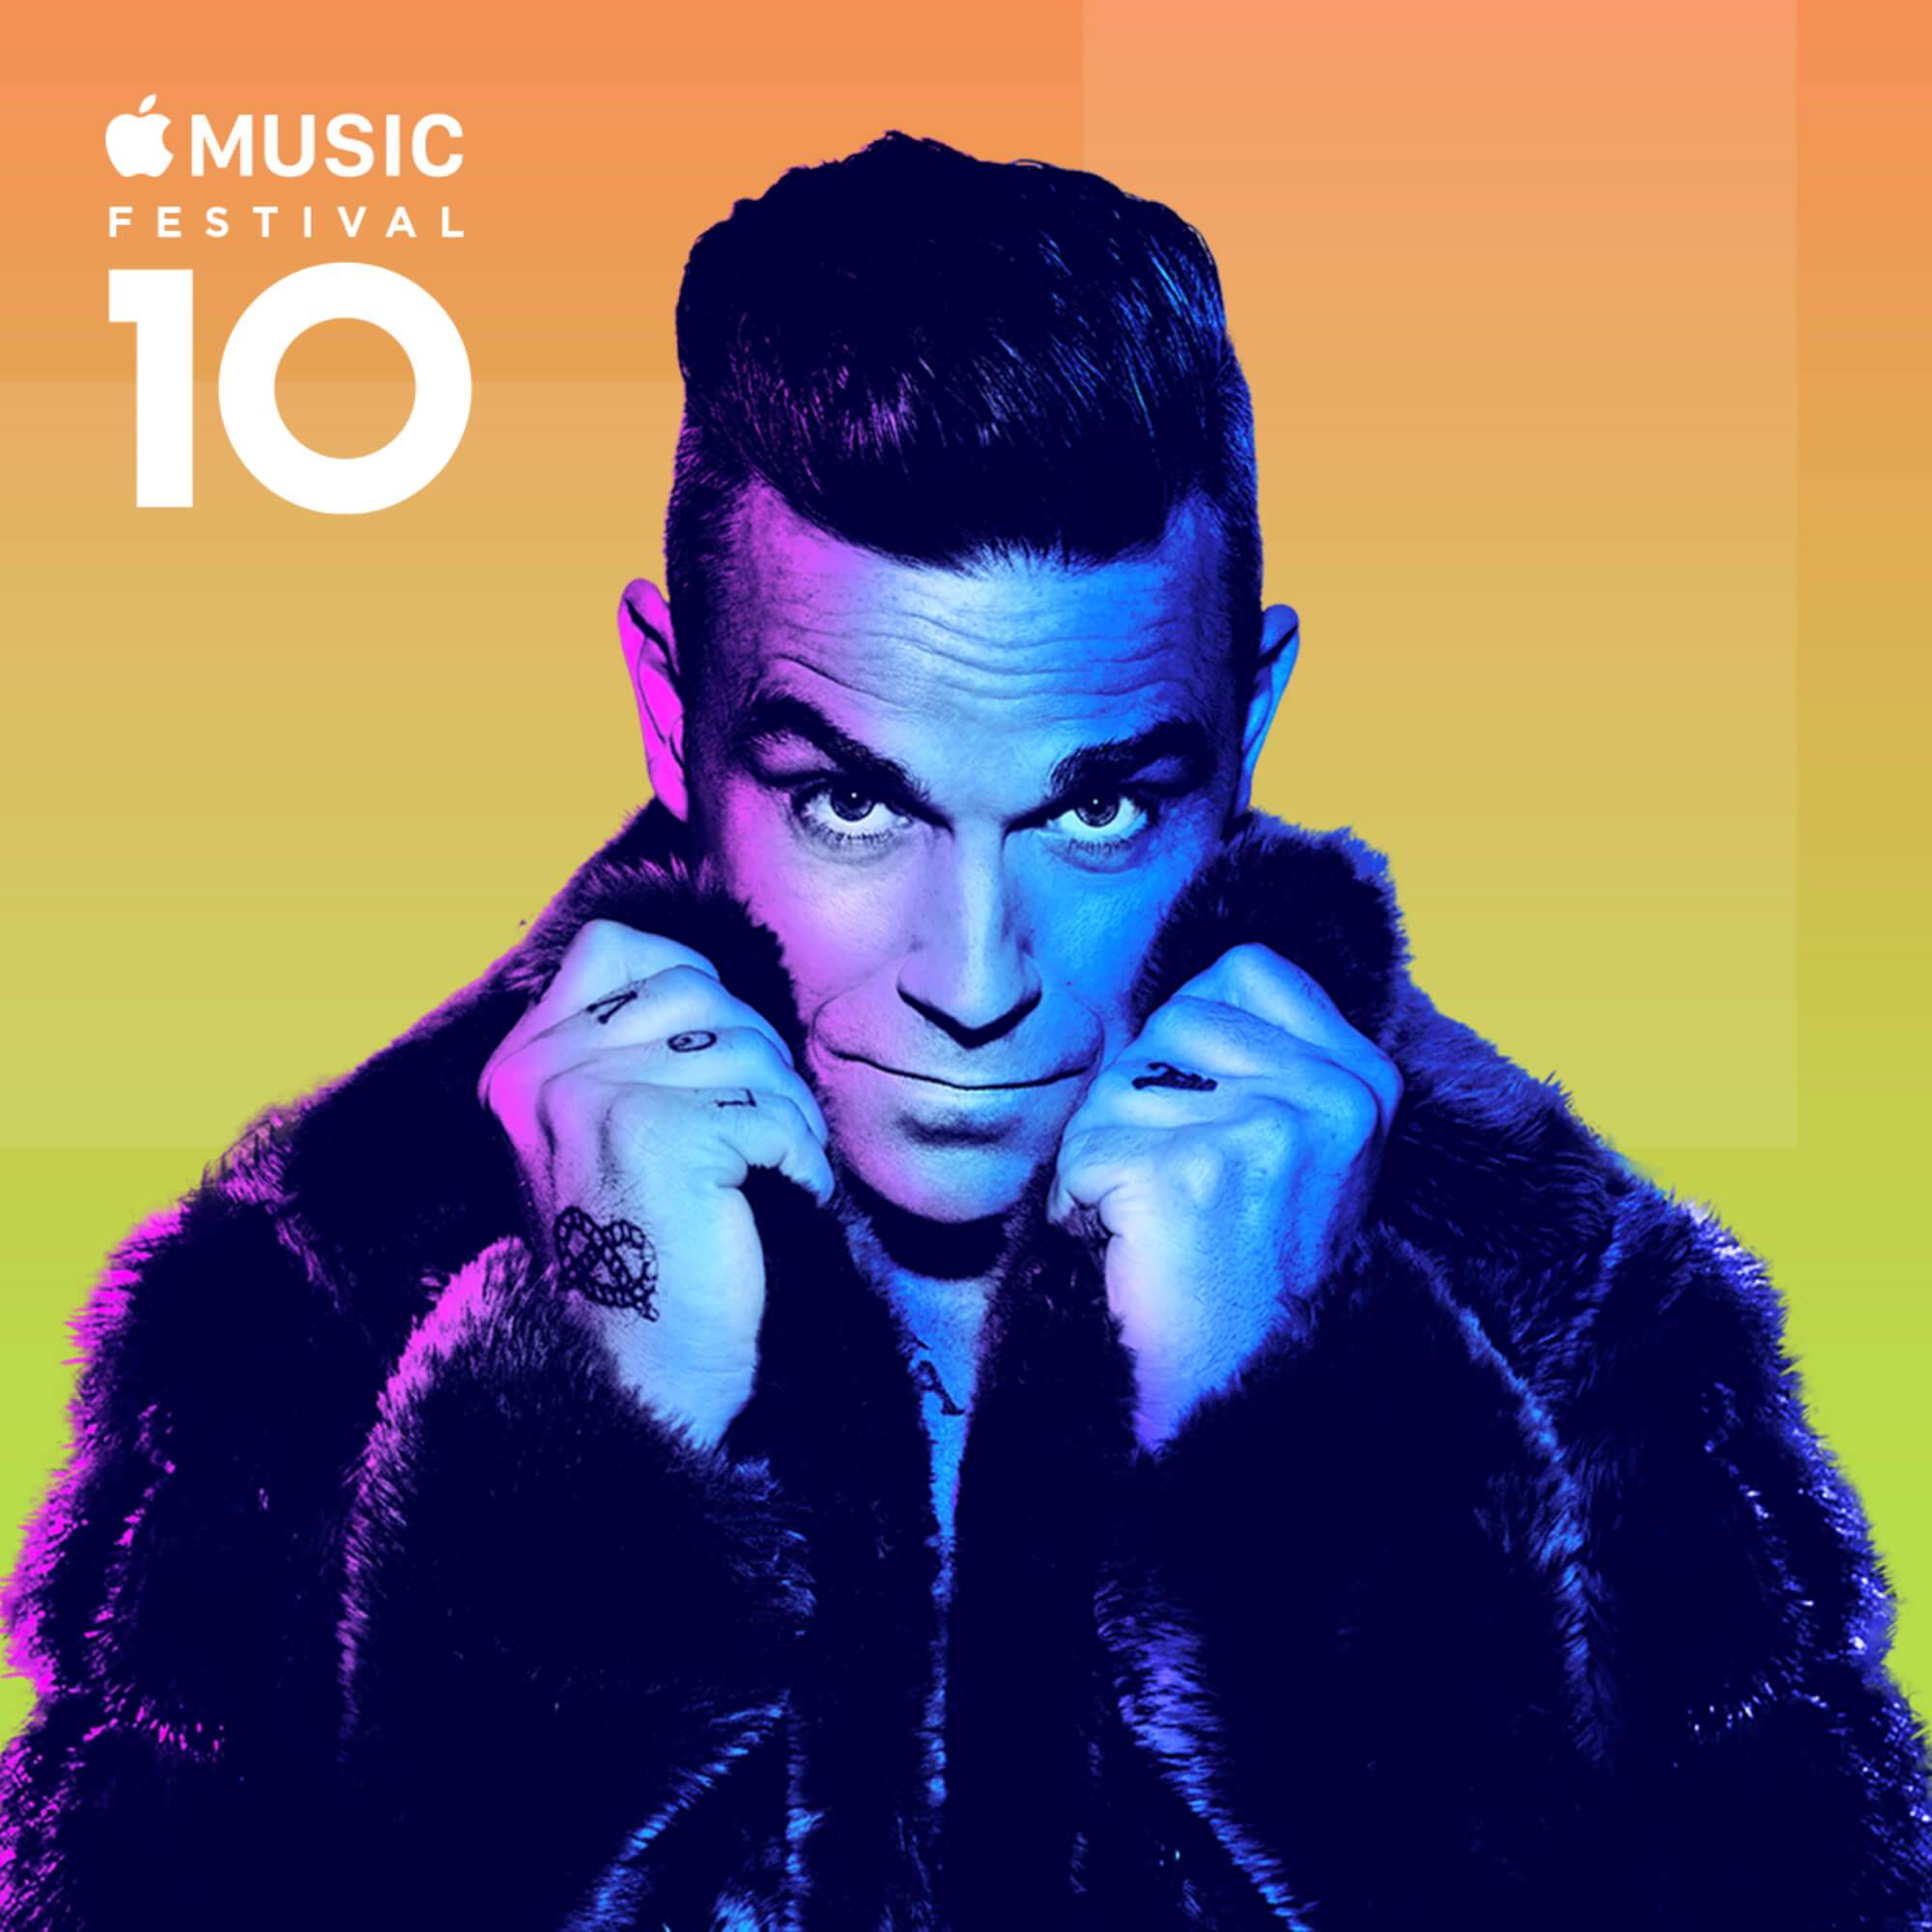 Robbie to perform at this year's Apple Music Festival